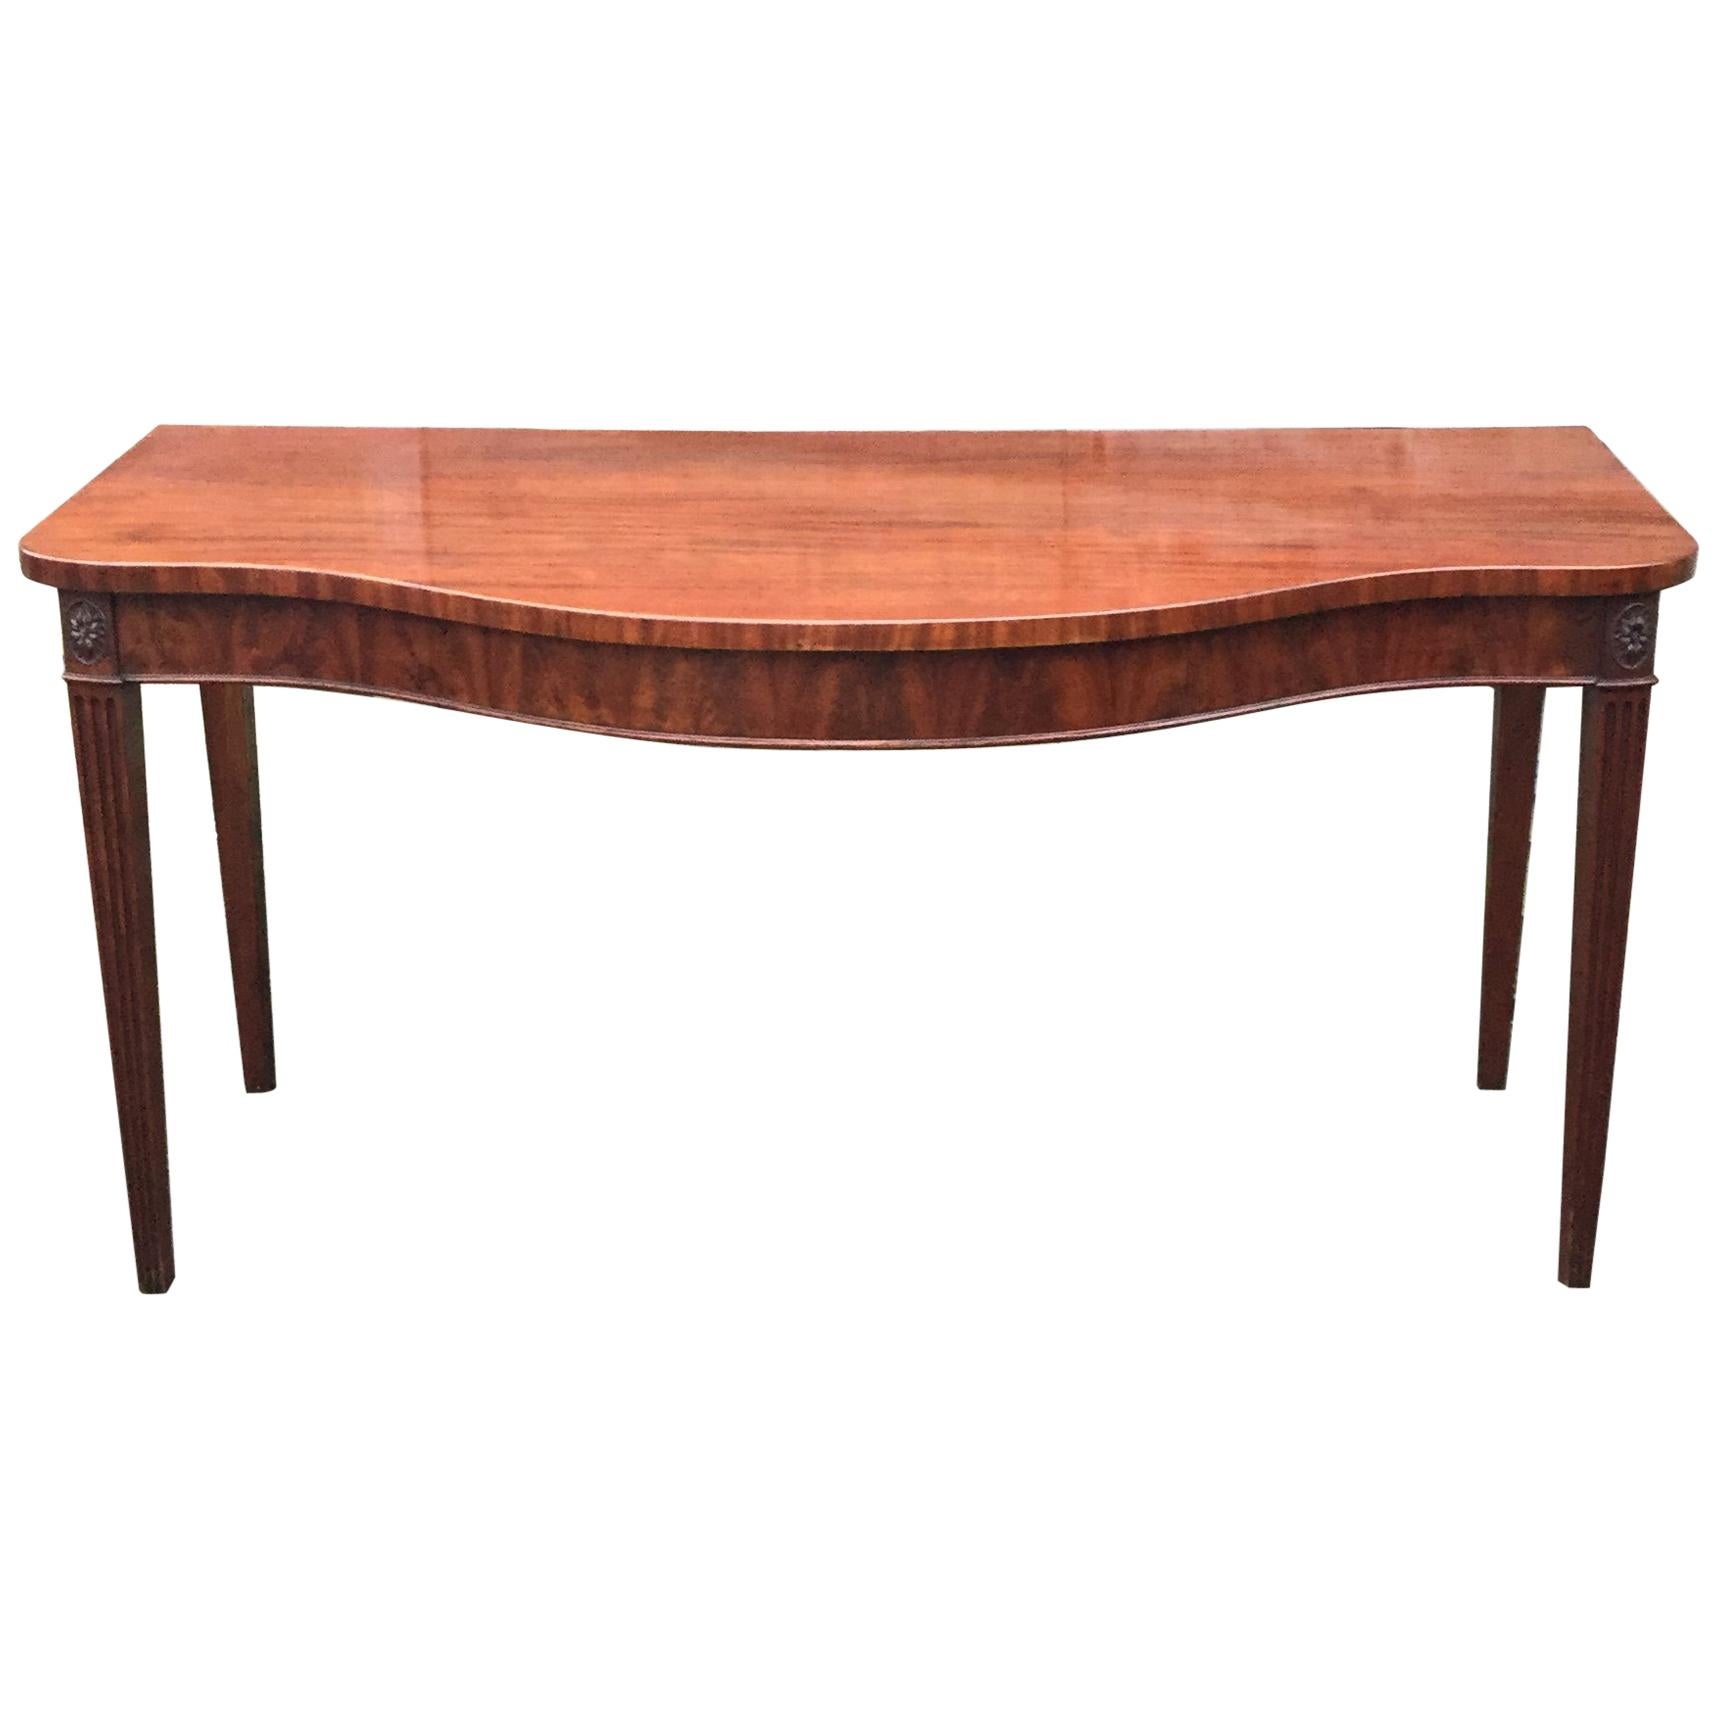 George III Period 18th Century Mahogany Serving Table For Sale